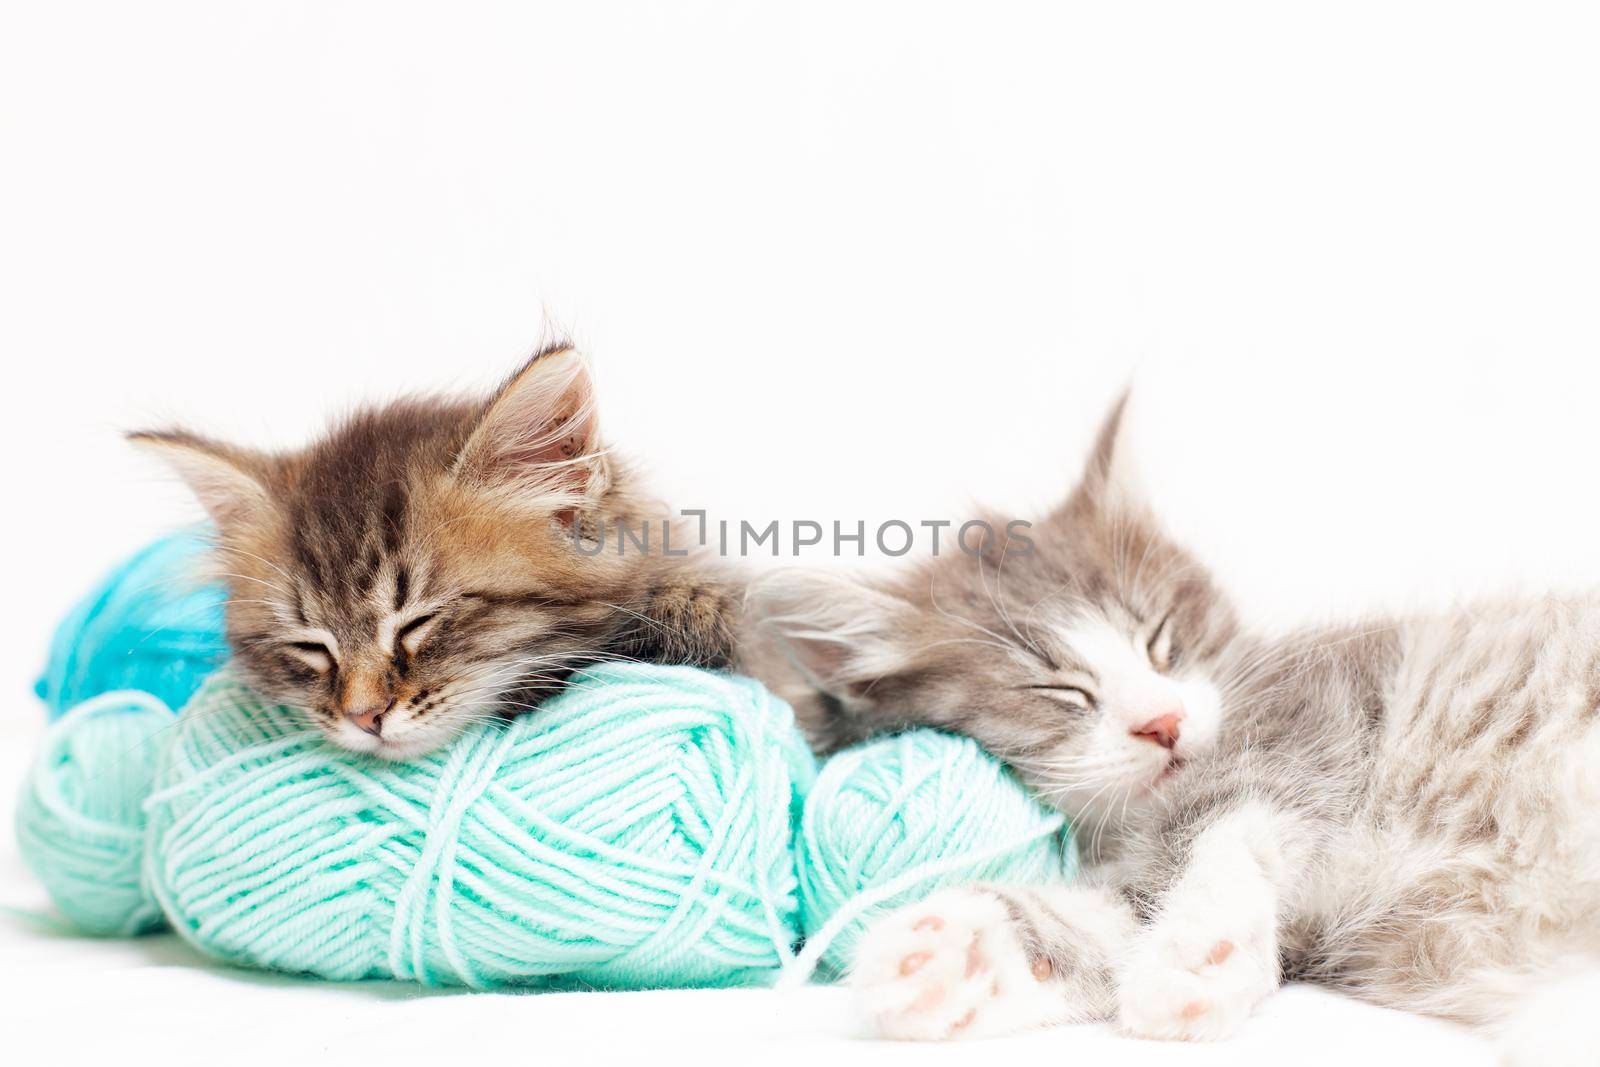 Striped cat with blue balls, skeins of thread on a white bed. An article about kittens. An article about pets. by alenka2194